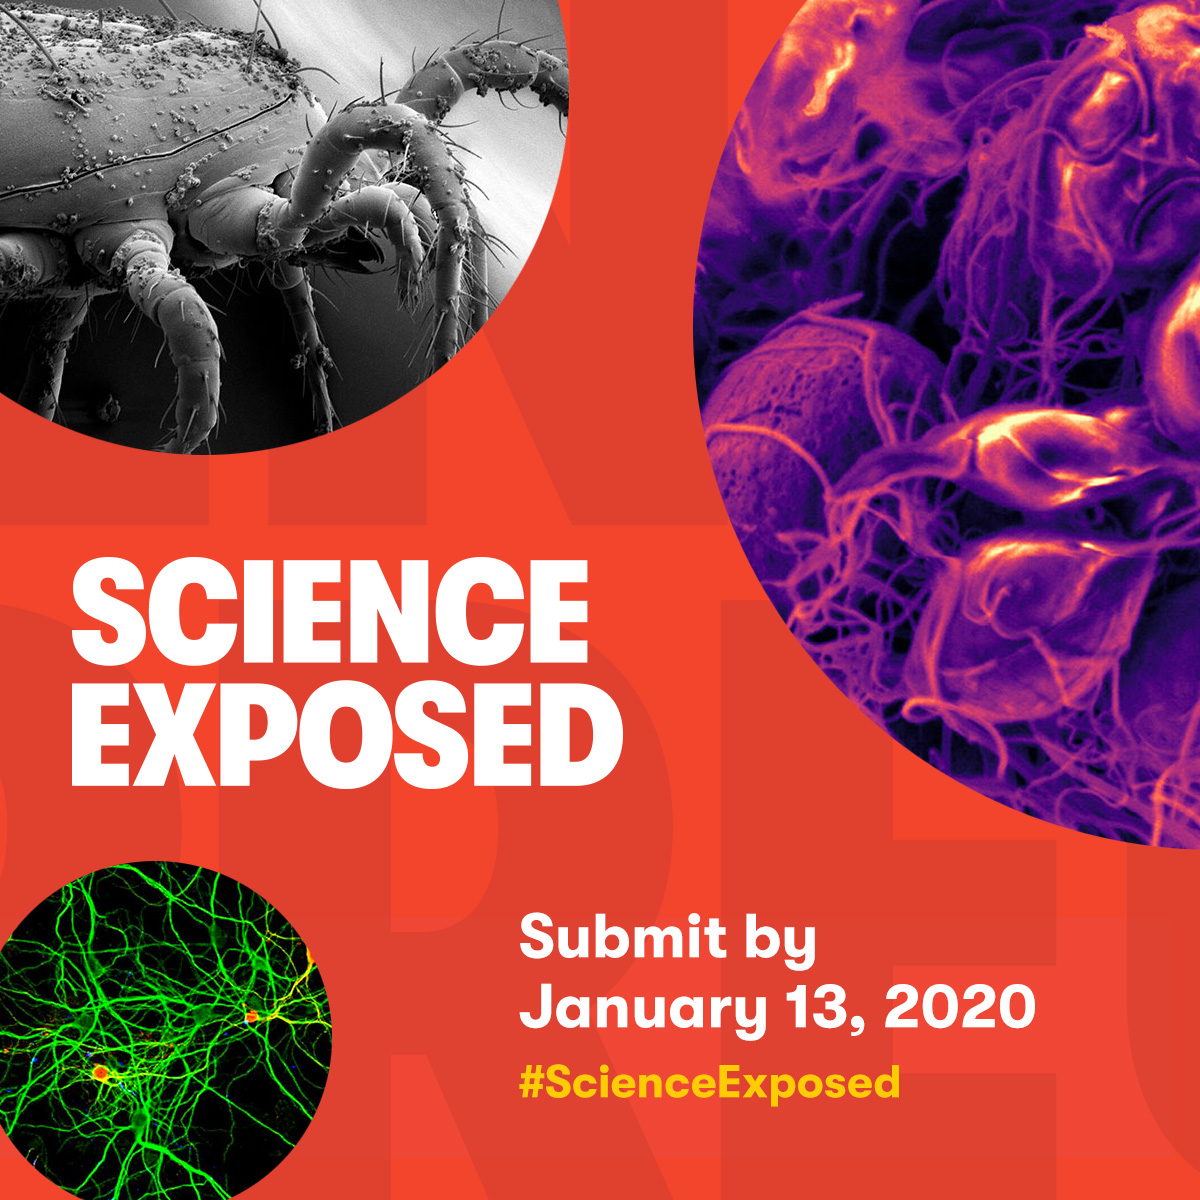 Science Exposed. Submit by January 13, 2020.